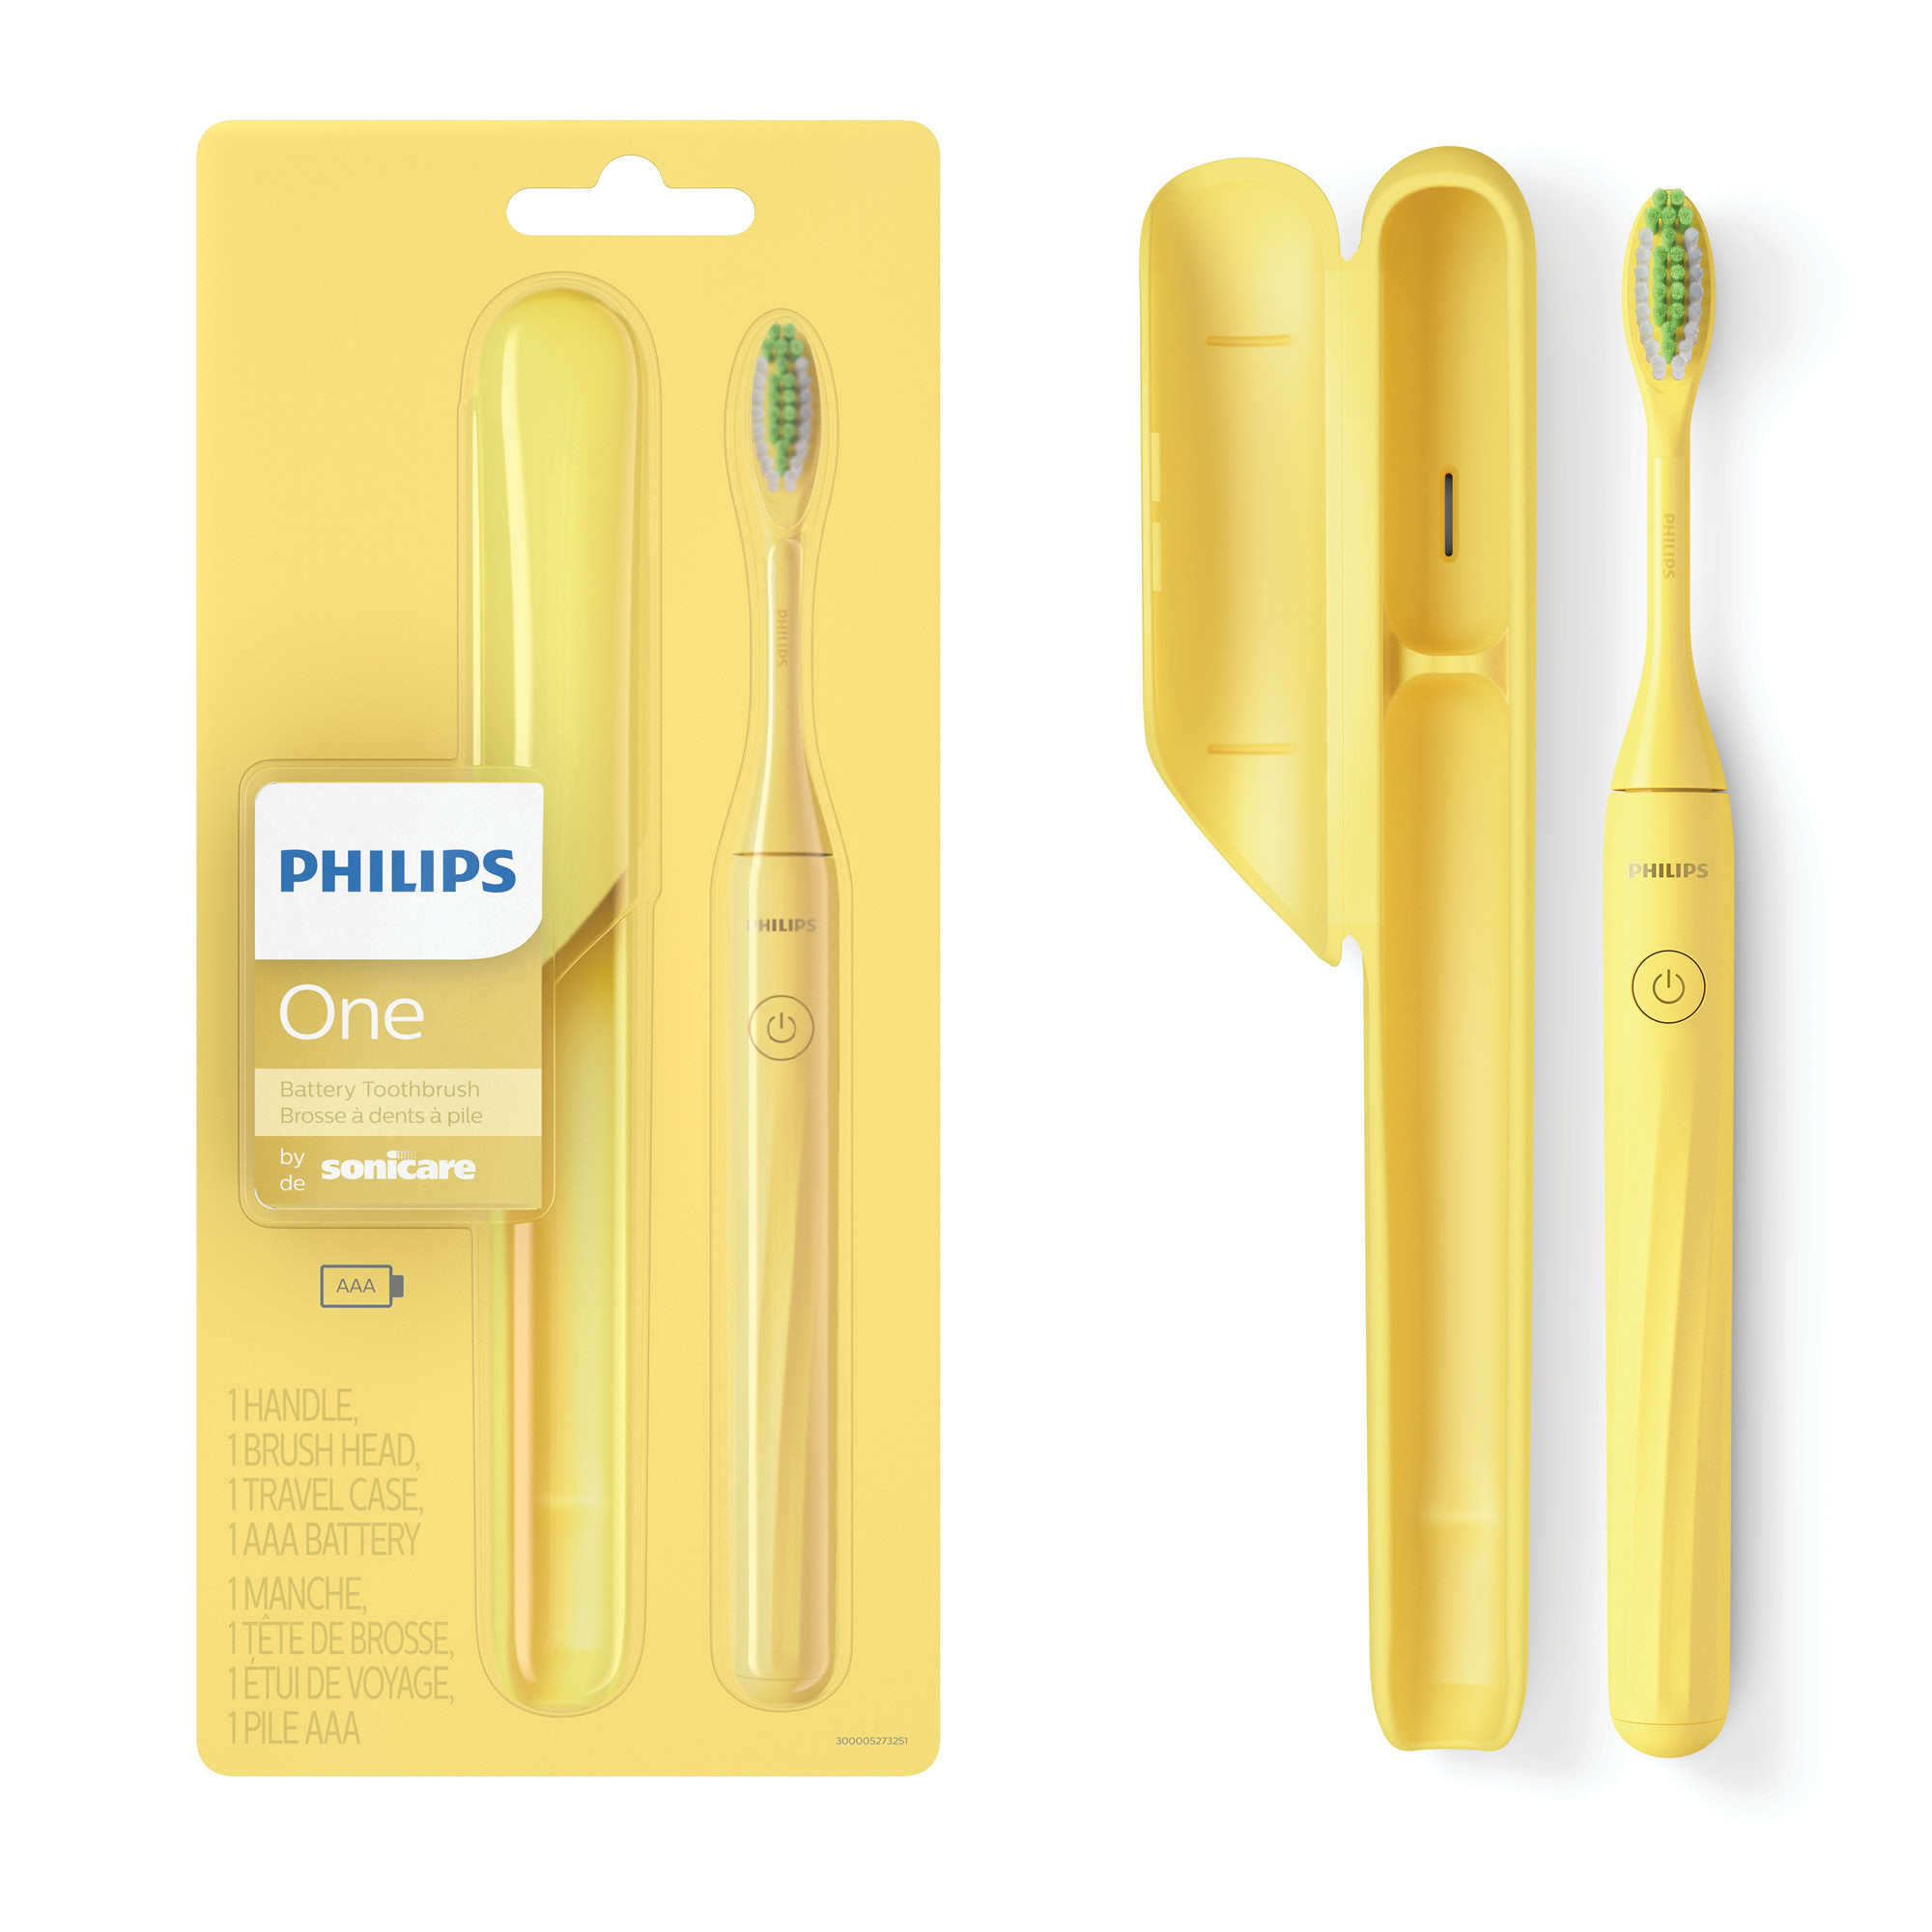 Philips One By Sonicare Battery Toothbrush, Mango, HY1100/02 - image 1 of 18